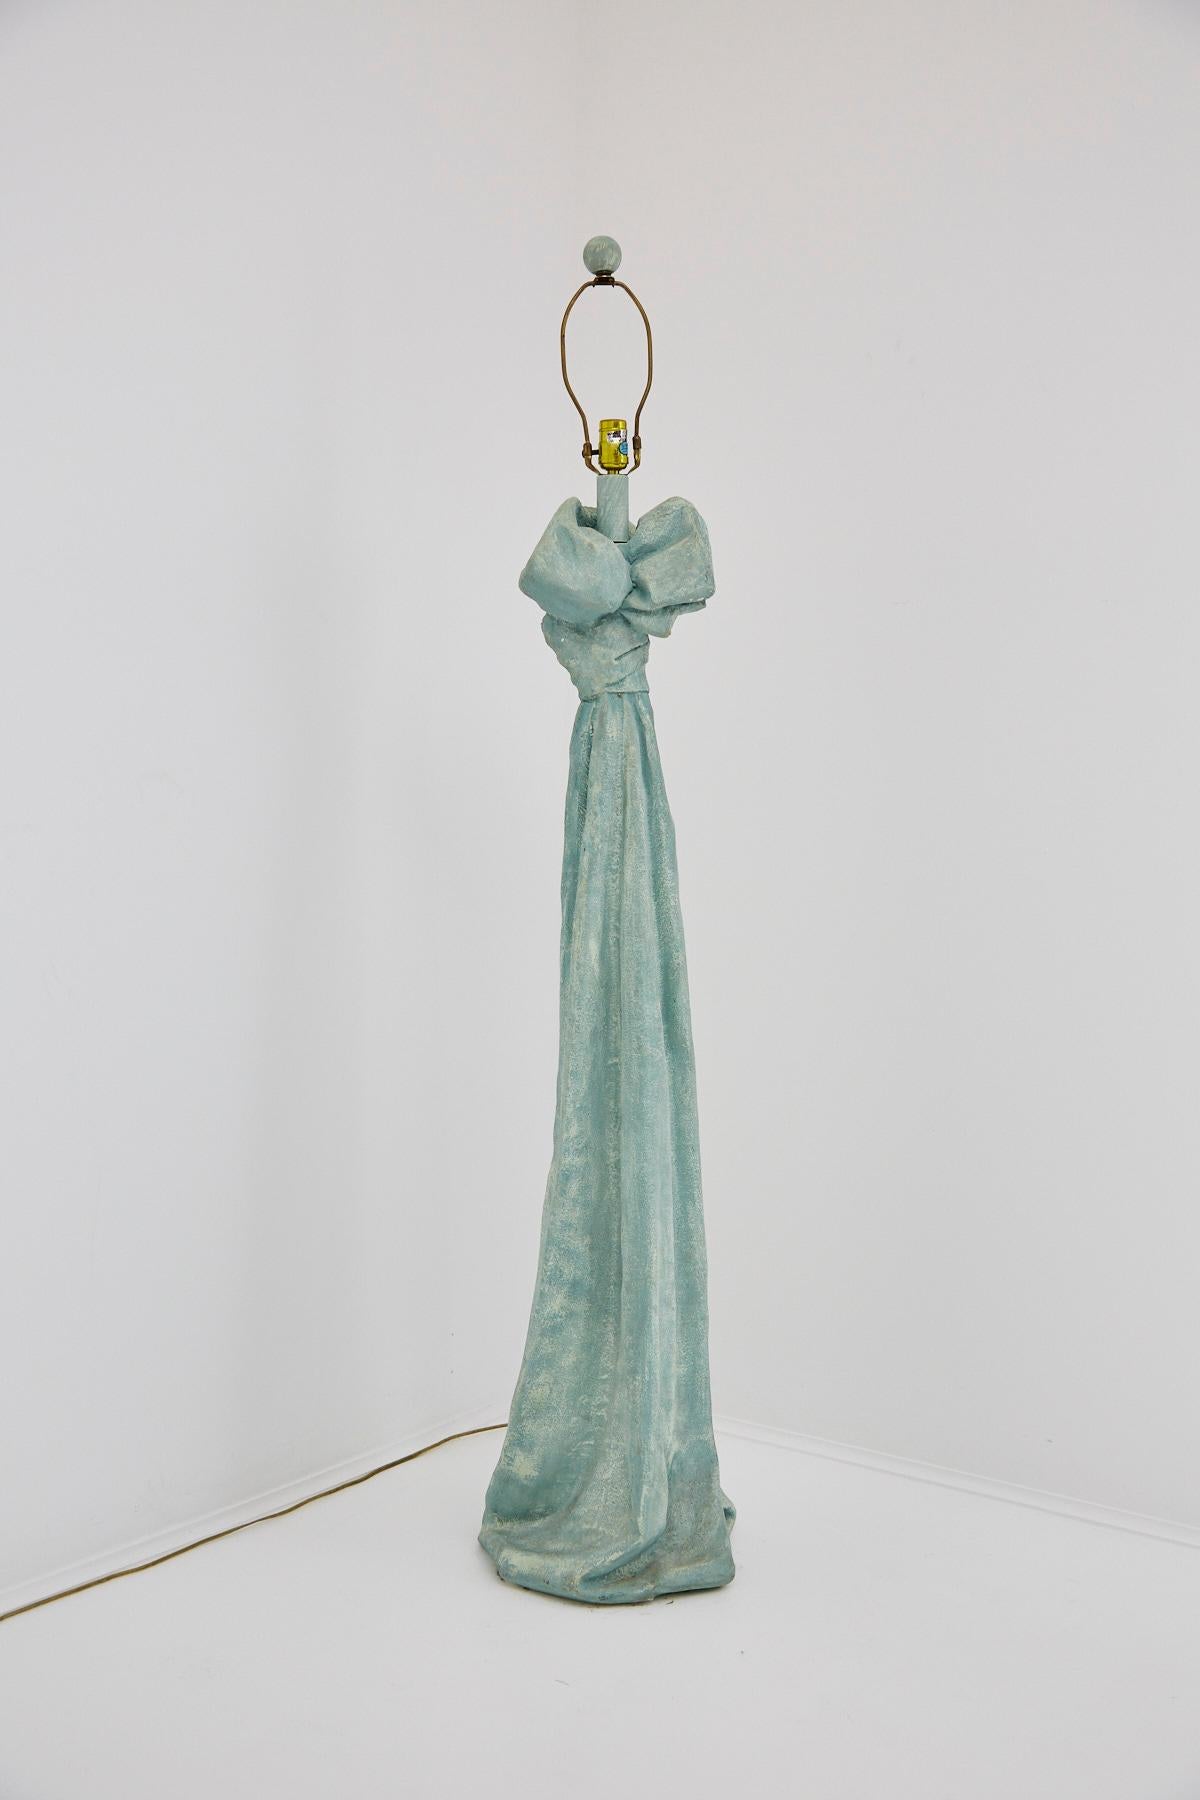 American Faux Draped Fabric Floor Lamp in the Manner of John Dickinson, 1980s